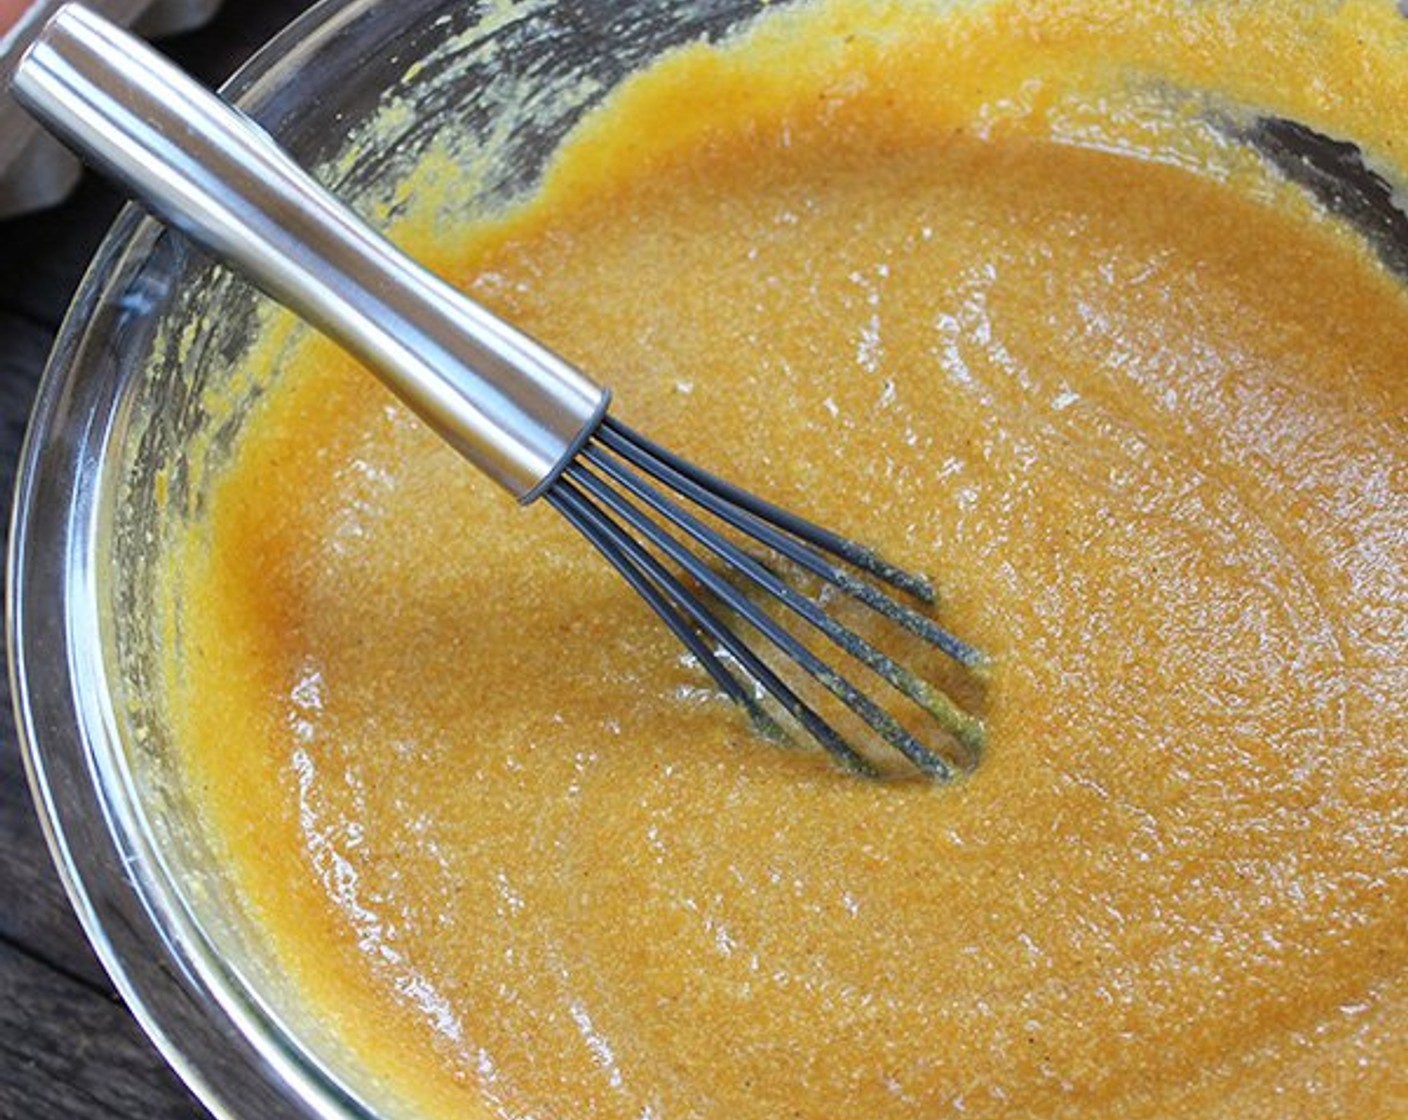 step 14 Transfer the puree to a large bowl. Add Heavy Cream (1 cup), Farmhouse Eggs® Large Brown Eggs (3),Brown Sugar (1/2 cup), remaining Maple Syrup (3 Tbsp), Ground Cinnamon (1/2 tsp), Ground Ginger (1/4 tsp), Ground Nutmeg (1/4 tsp), Ground Cloves (1/4 tsp), Kosher Salt (1/4 tsp), and Ground Black Pepper (1 pinch). Whisk until smooth.